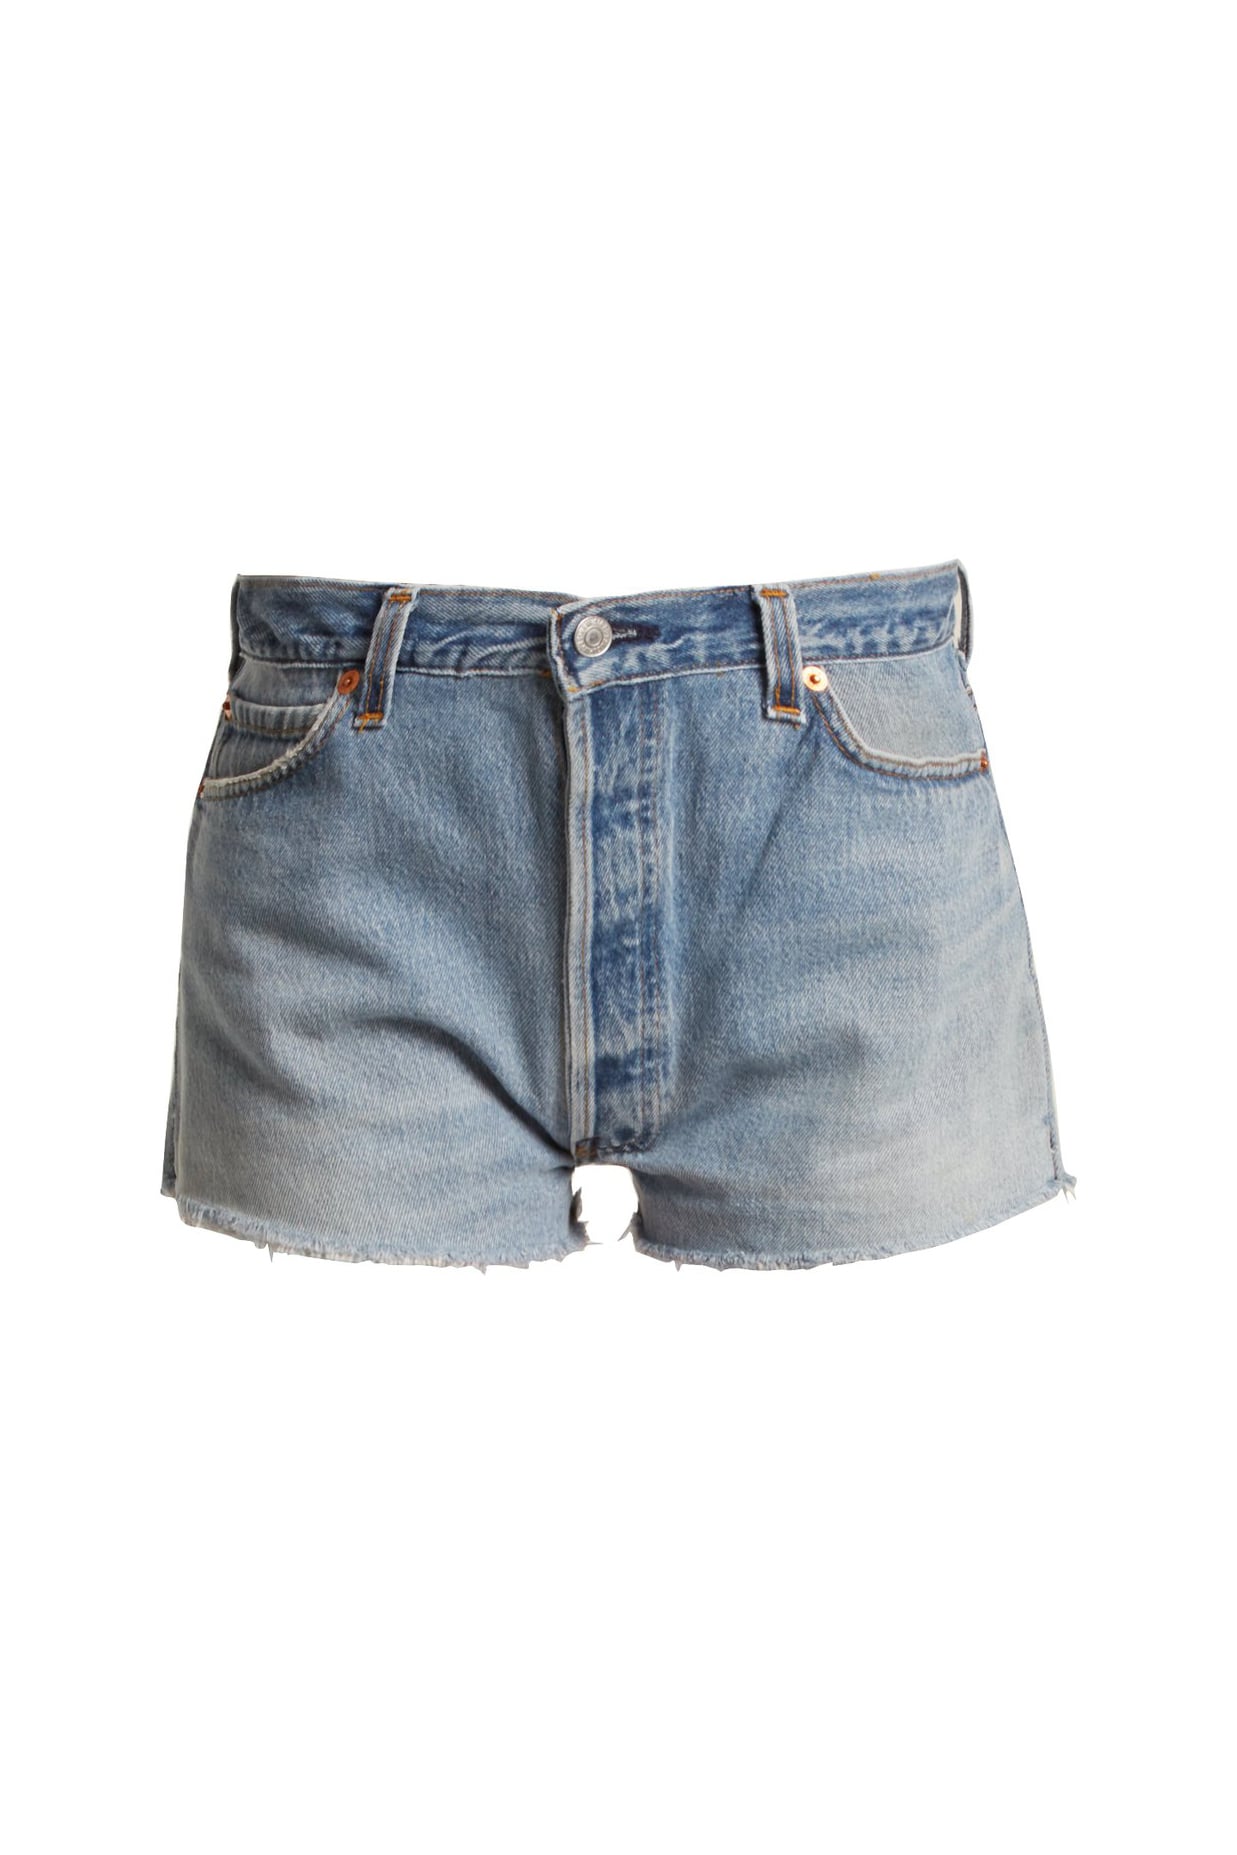 Re/Done Originals x Levi's The Short Mid-Rise Denim Shorts | 12 Key Pieces  You Can Build Your Whole Summer Look Around | POPSUGAR Fashion Photo 35